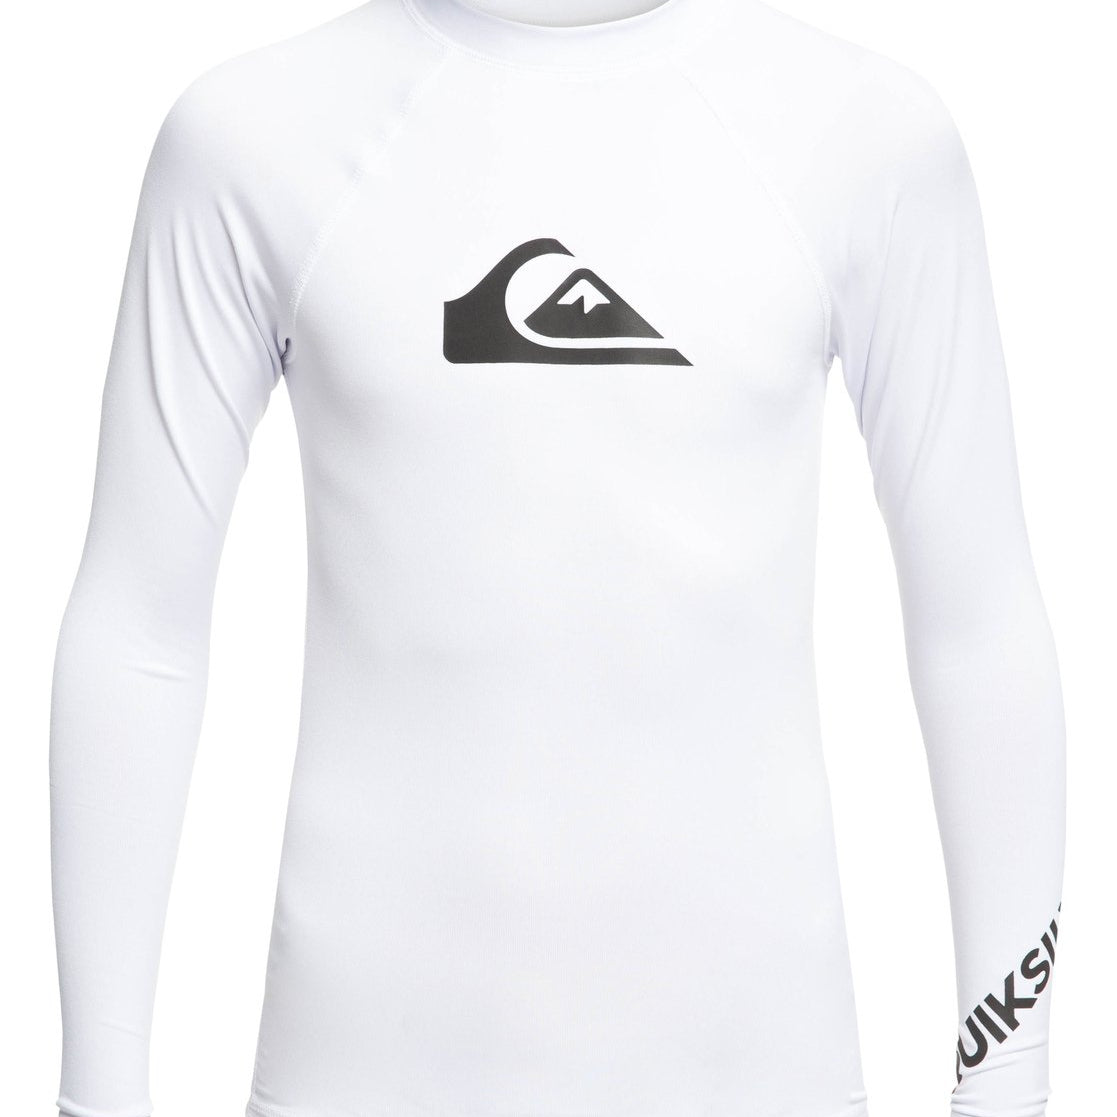 Quiksilver All Time LS Youth Lycra WBB0-White S/10